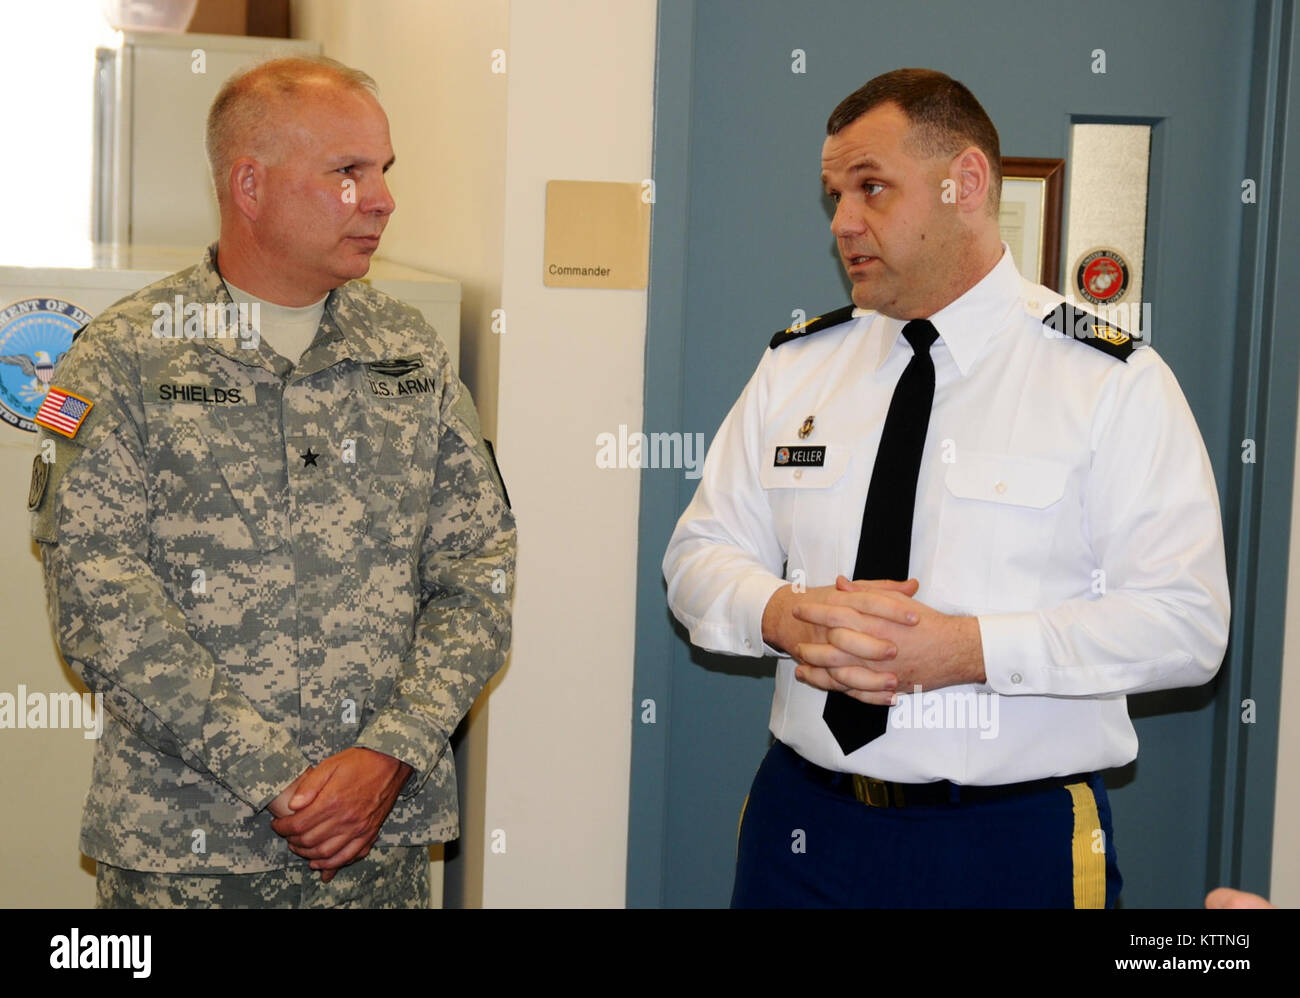 ALBANY, N.Y.-- First Sgt. Jason Keller, Senior Enlisted Advisor for the Albany, N.Y., Military Processing Station (MEPS) guides Brig. Gen, Raymond Shields, Director, Joint Staff, New York National Guard, on a tour of the station Feb. 25, 2013. Stock Photo